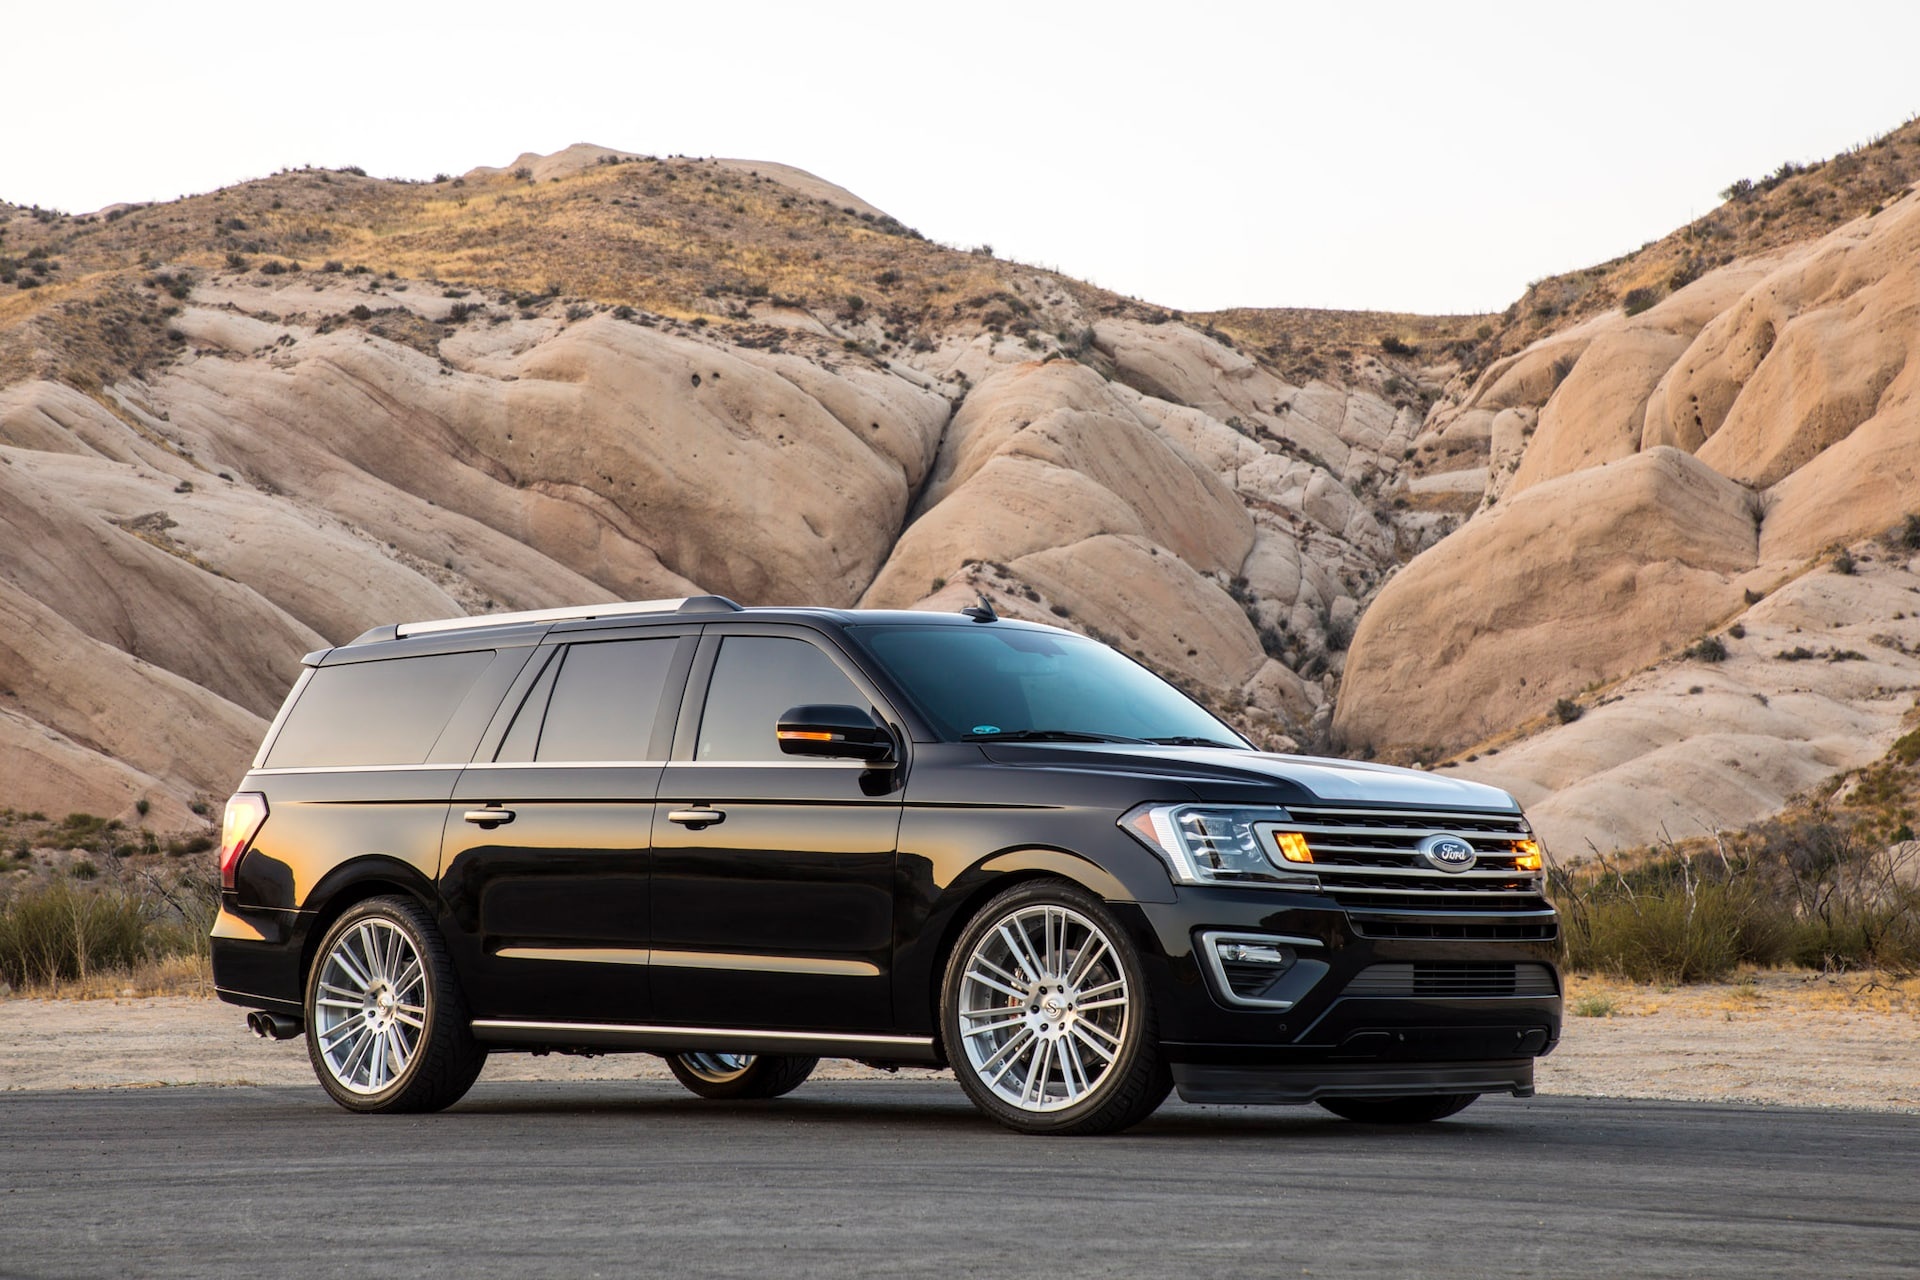 Ford Expedition, Concours de expedition, 1920x1280 HD Desktop